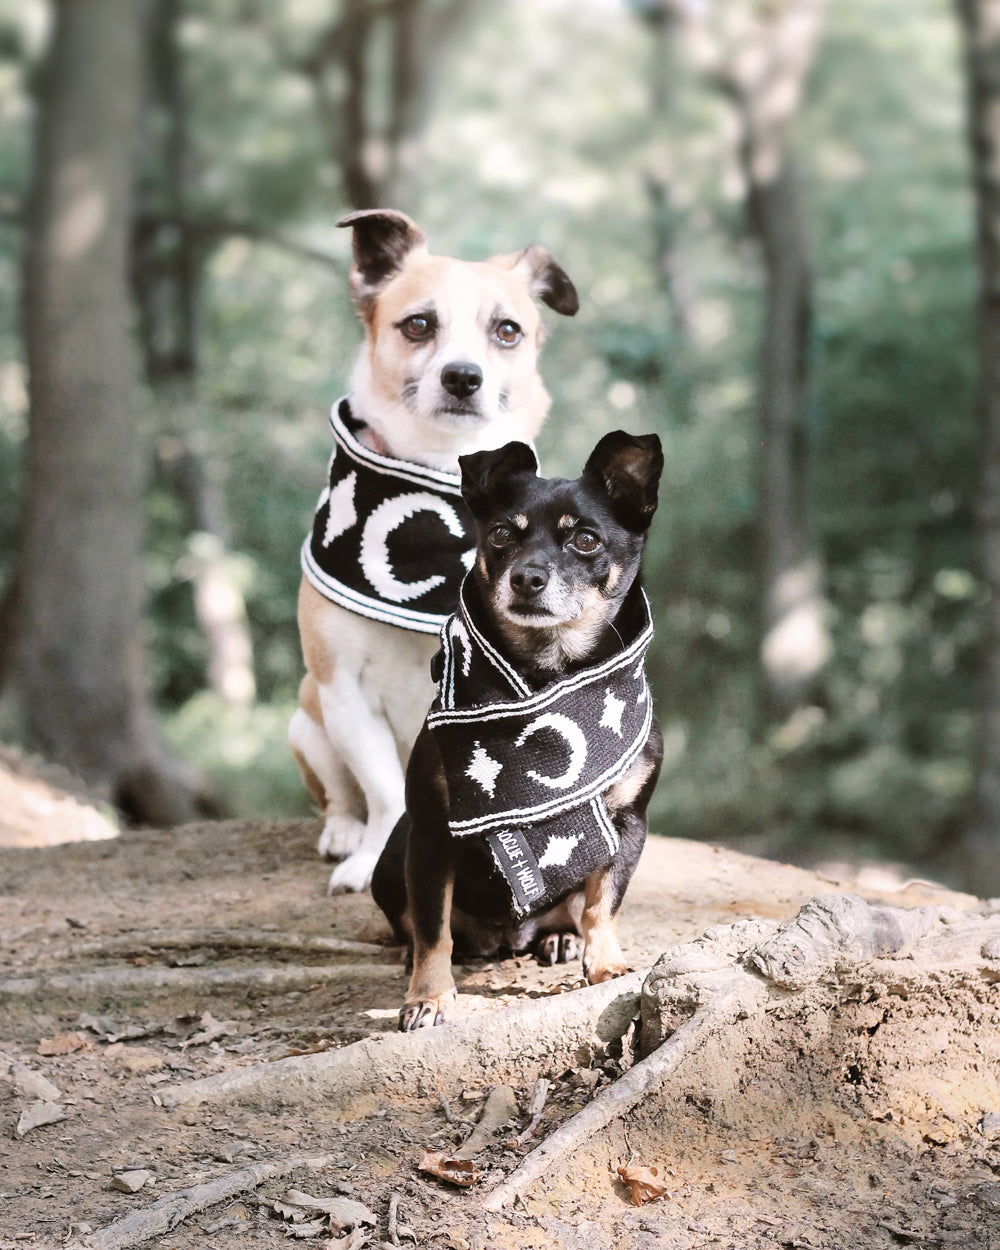 Moon Pupper Scarf - Dog or Cat